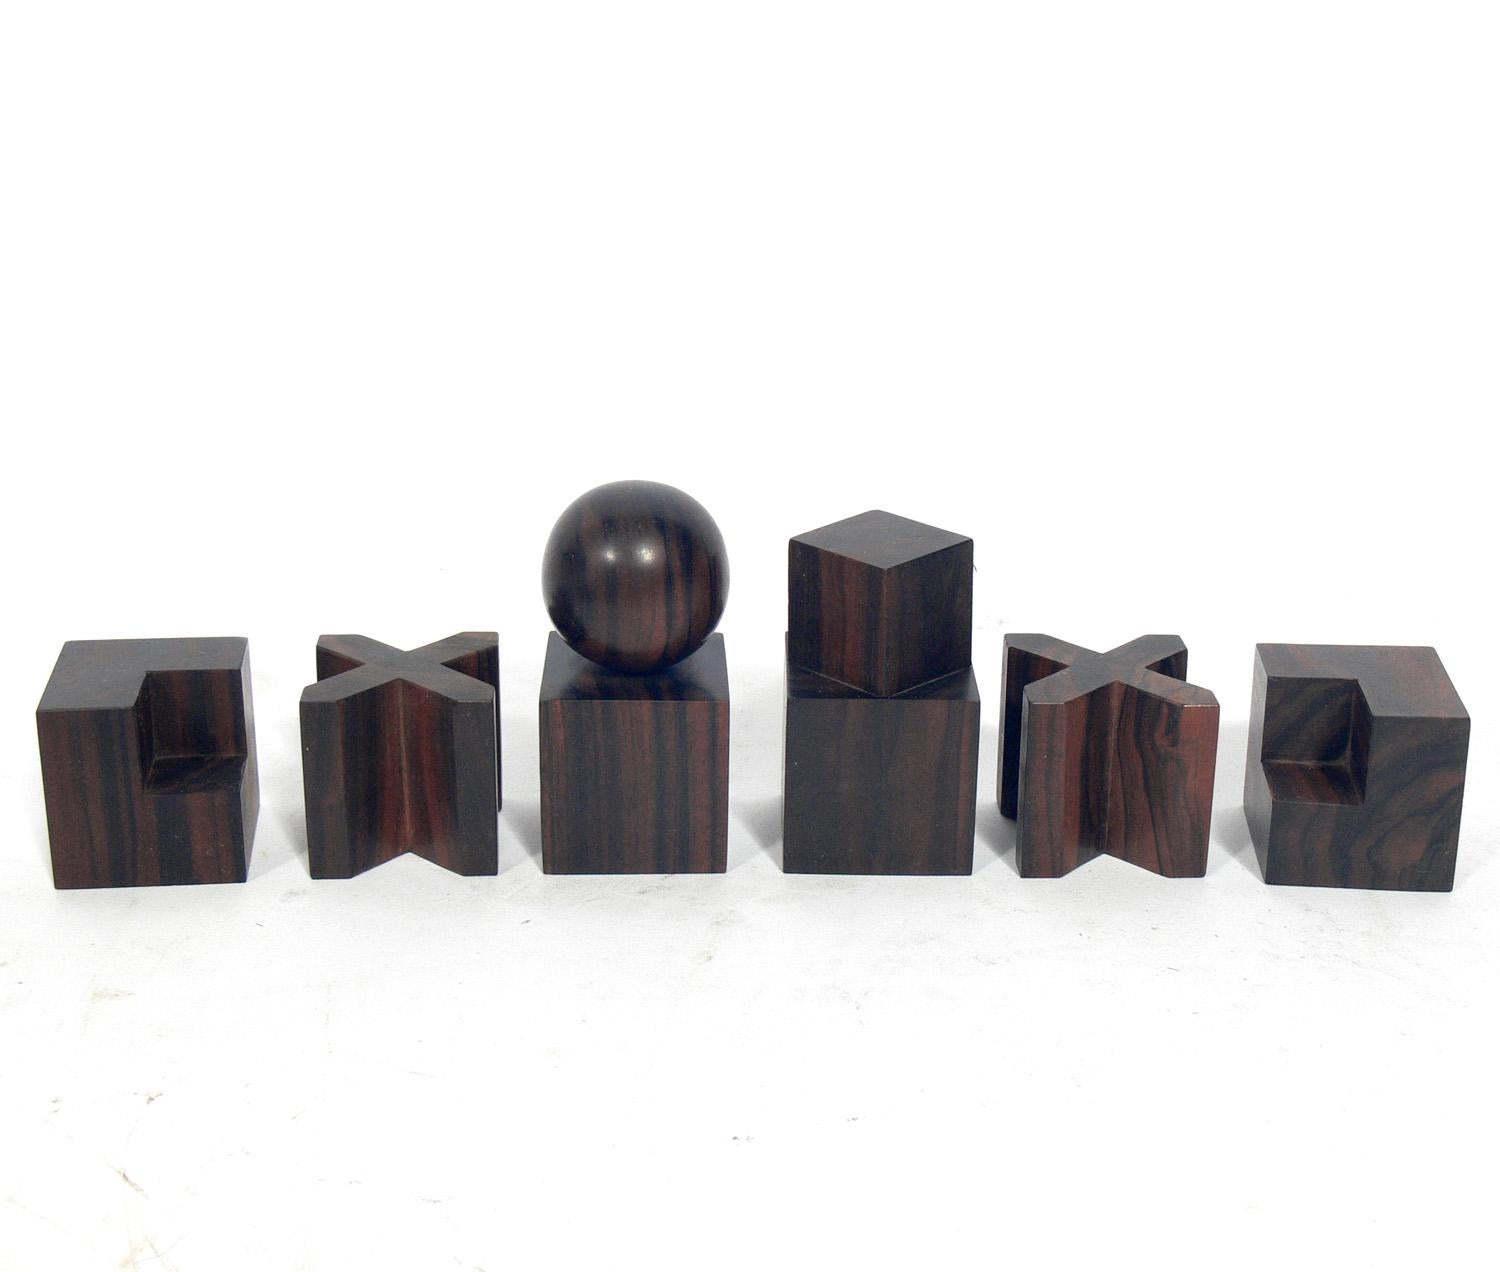 Modernist chess set, originally designed by Josef Hartwig at the Bauhaus, circa 1920s. This set is a later example, probably circa 1960s. It is a larger scale construction and crafted in beautifully grained rosewood and walnut. The tallest pieces